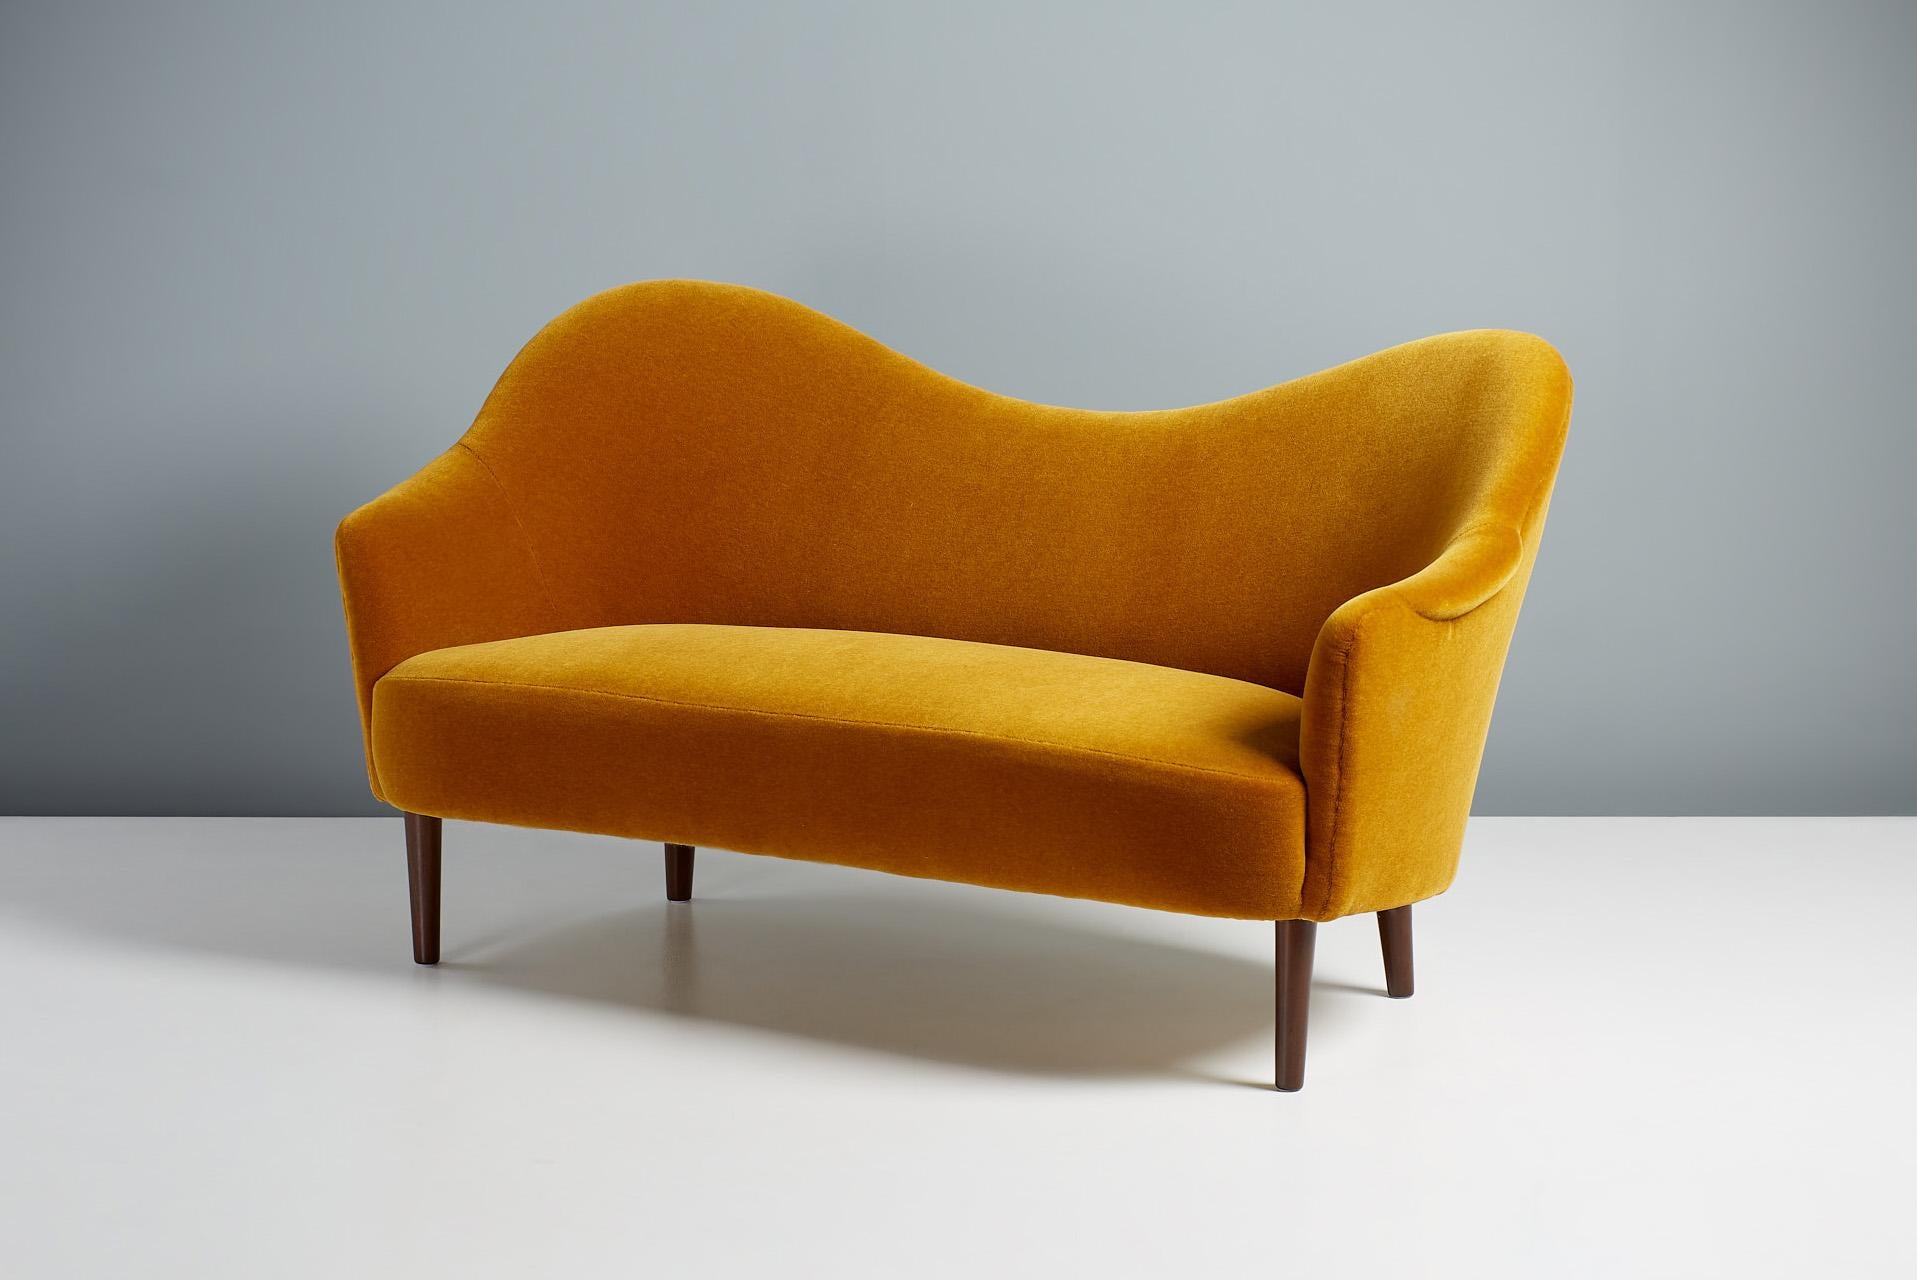 Carl Malmsten - Samspel sofa, 1956

Malmsten's iconic curved sofa was designed in 1956 and produced by Swedish cabinetmakers AB Record in Bollnas. It is considered one the finest examples of Scandinavian Modern sofa design and remains in high